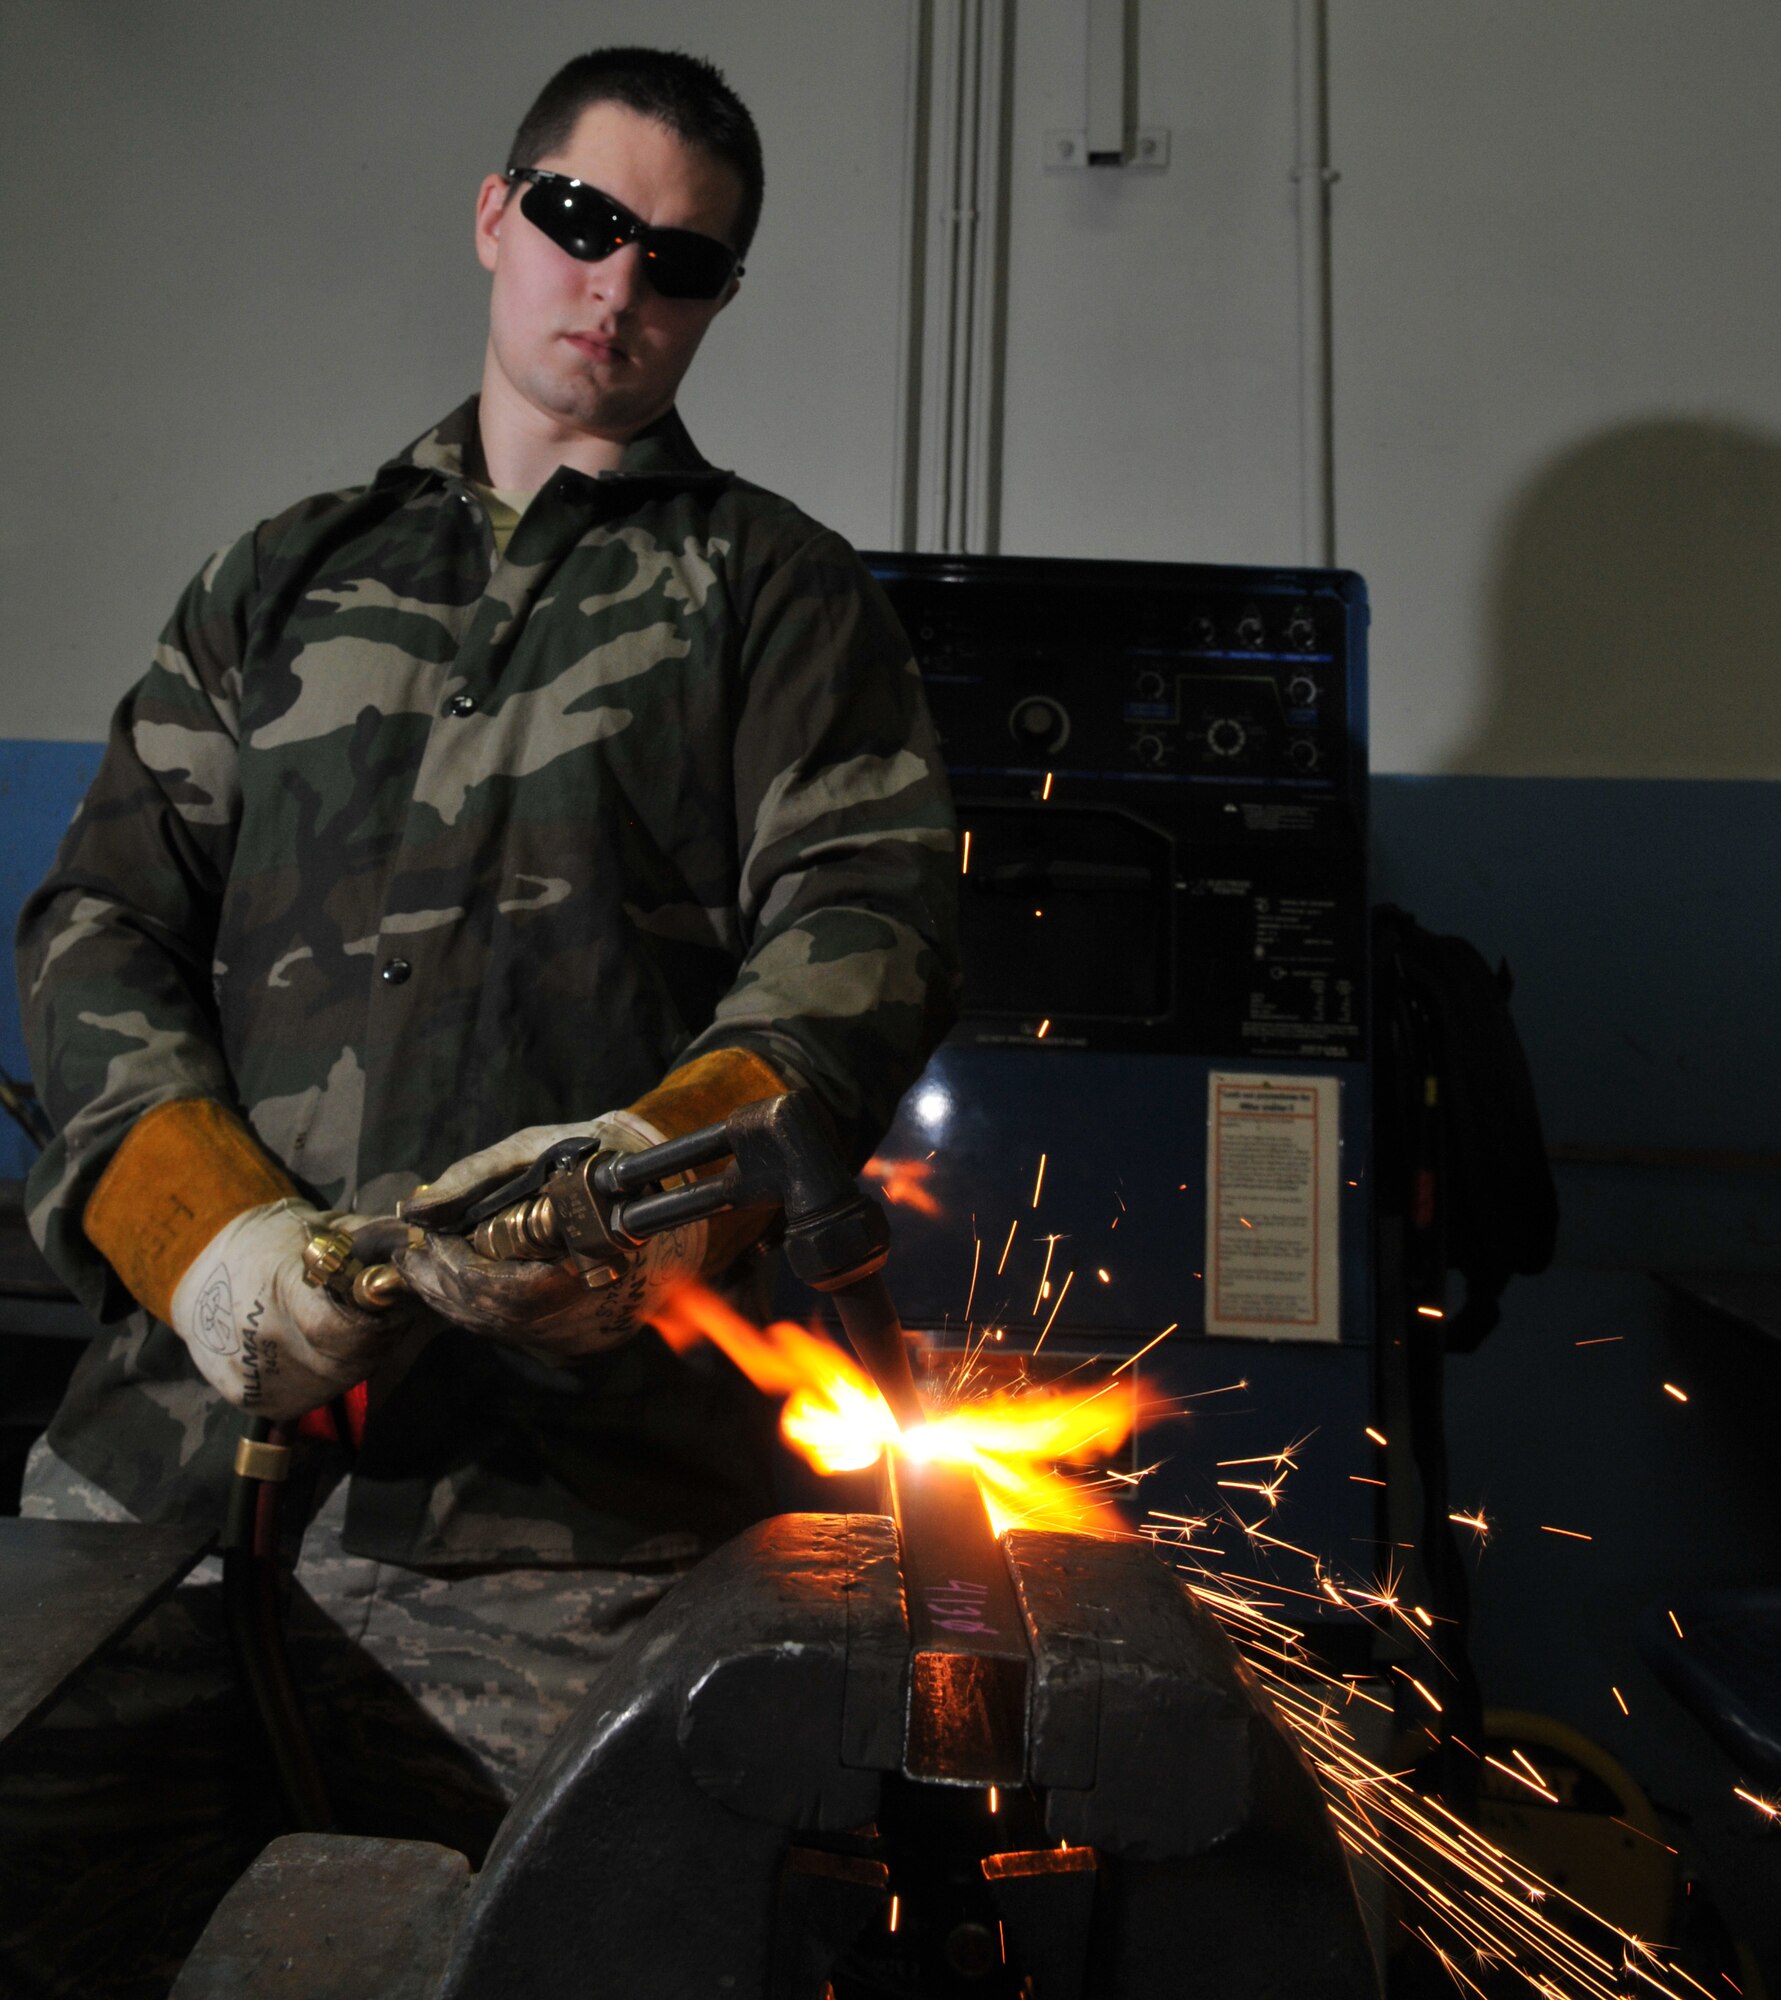 SPANGDAHLEM AIR BASE, Germany -- Senior Airman James Hurst, 52nd Equipment Maintenance Squadron, cuts metal with an oxyacetylene rig Jan. 22 in the metals technology welding room. This process is necessary to cut metal to a size small enough for disposal. (U.S. Air Force photo/Airman 1st Class Nick Wilson)